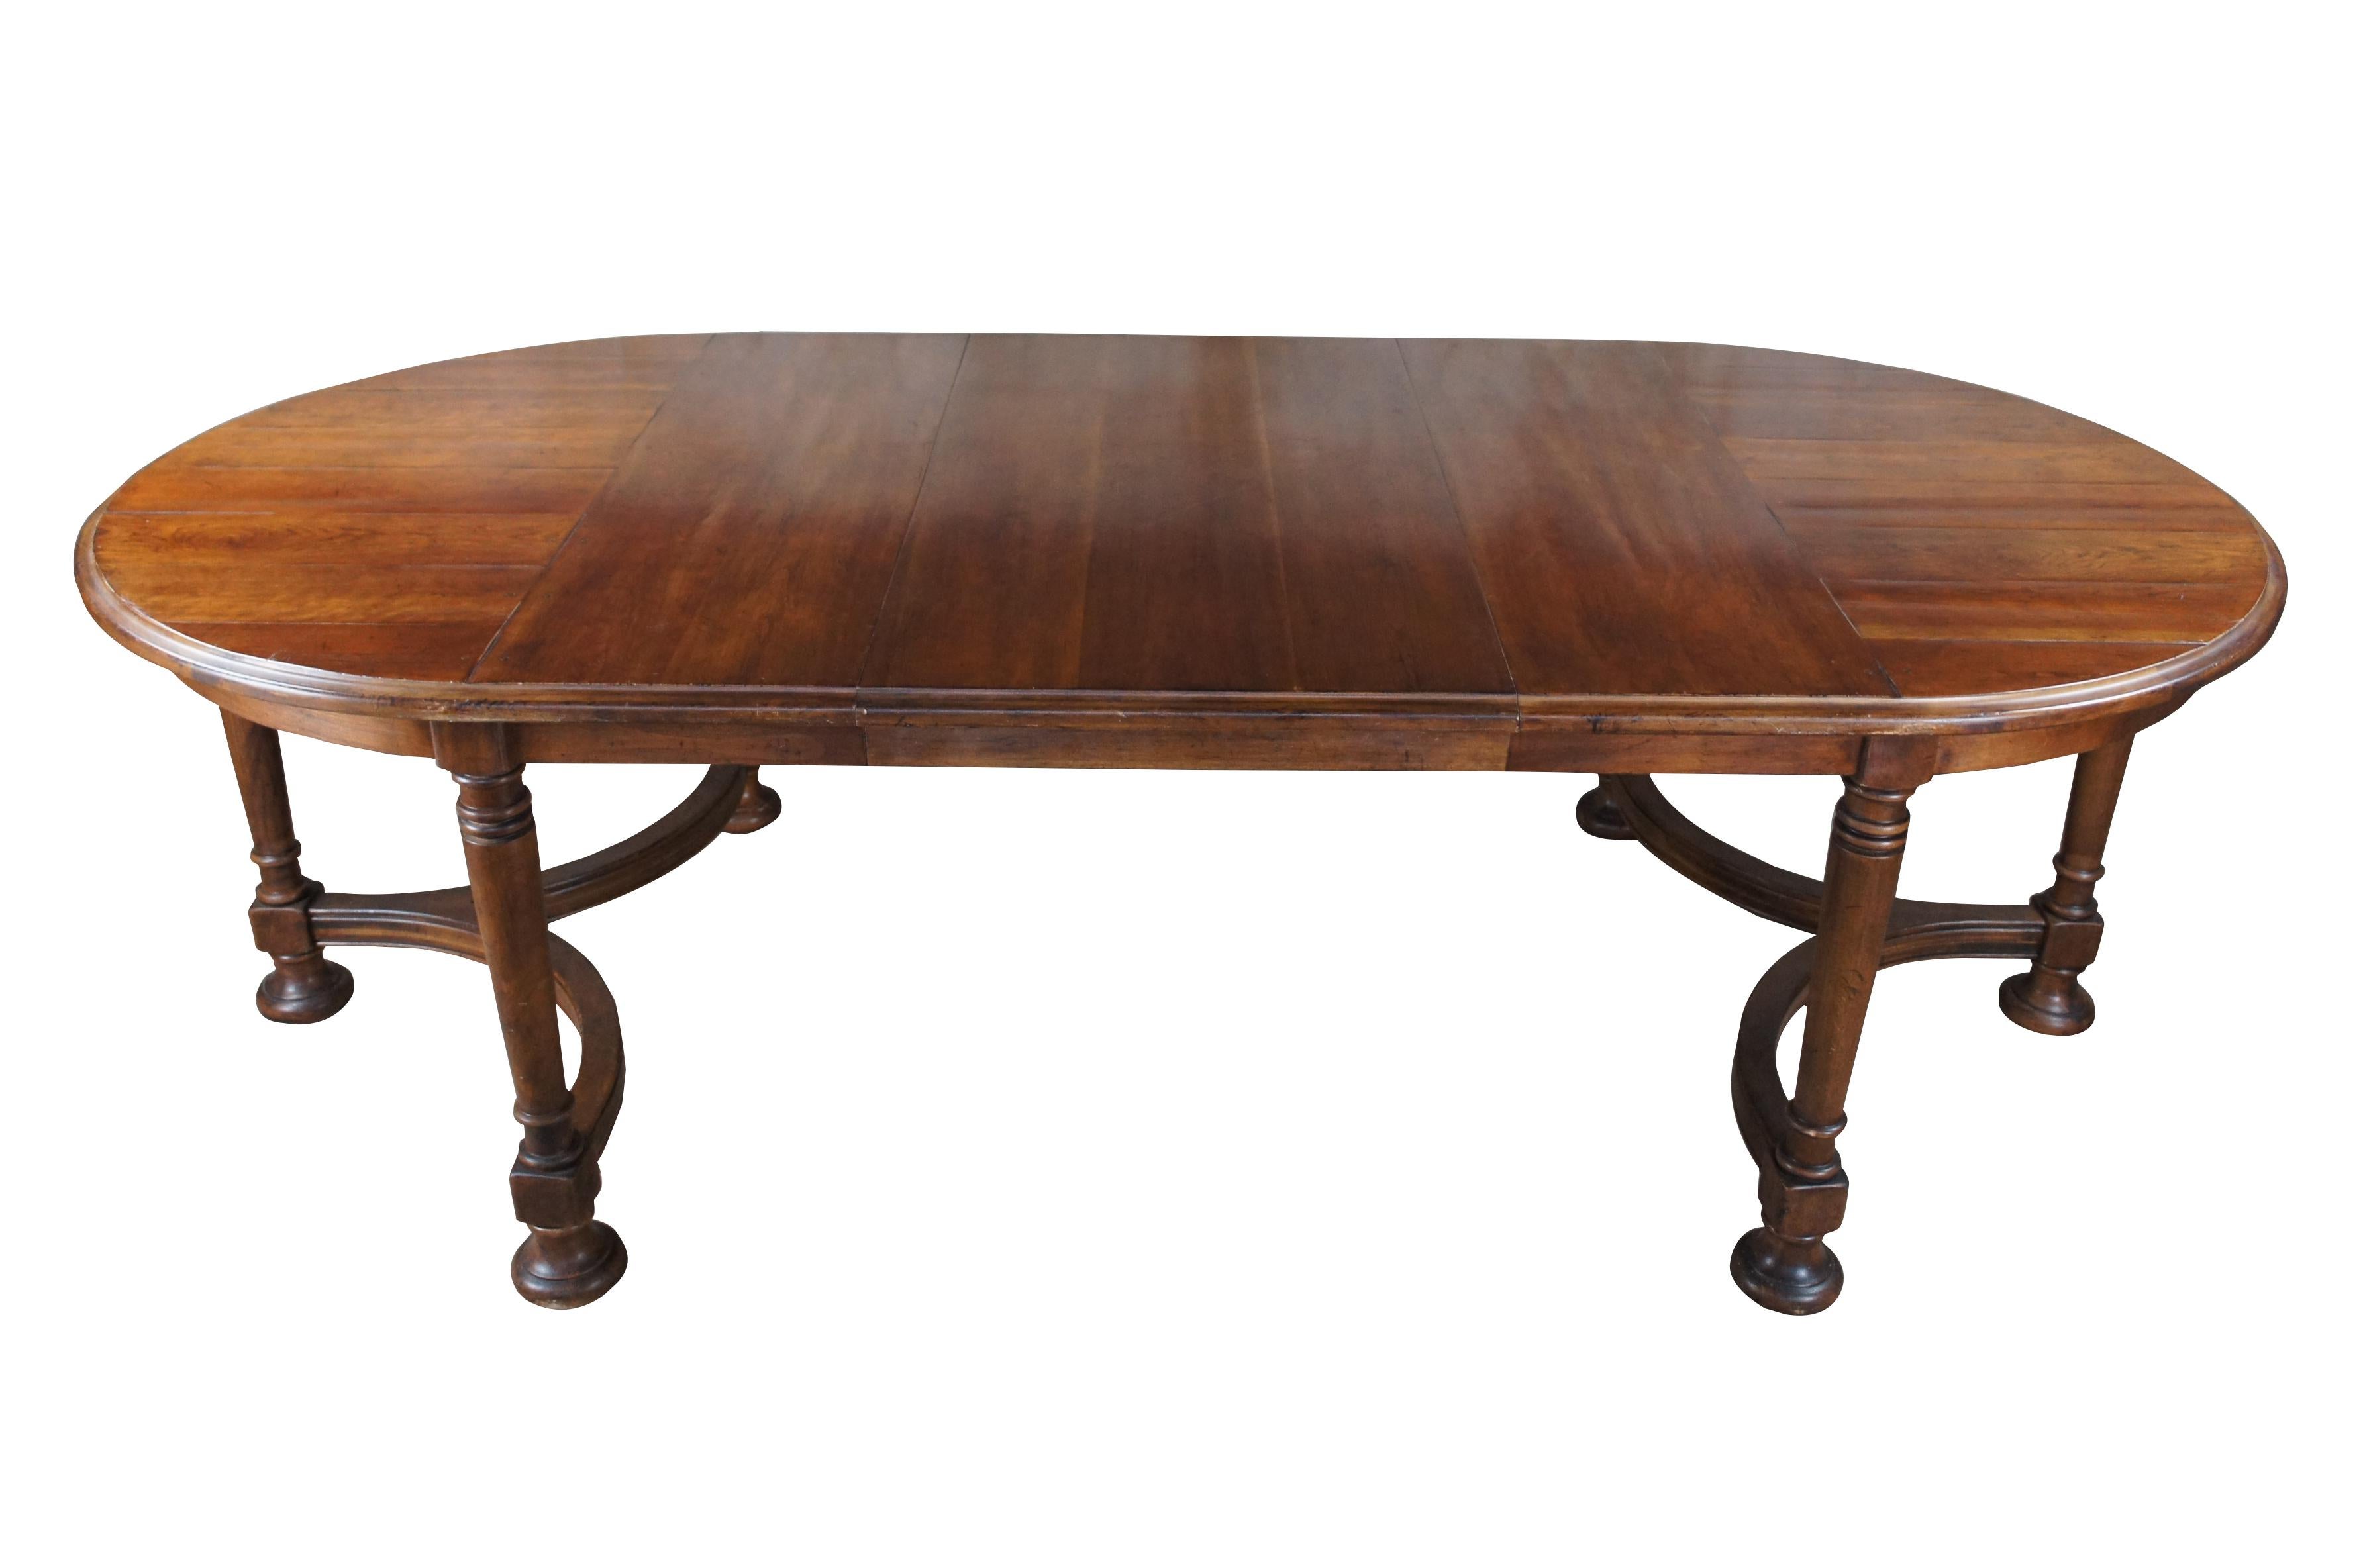 Vintage Drexel Heritage Old World / Tuscan style dining table.  Made of cherry featuring oval form with plank top and William and Mary style base.  Marked Drexel 211-620

Dimensions:
76